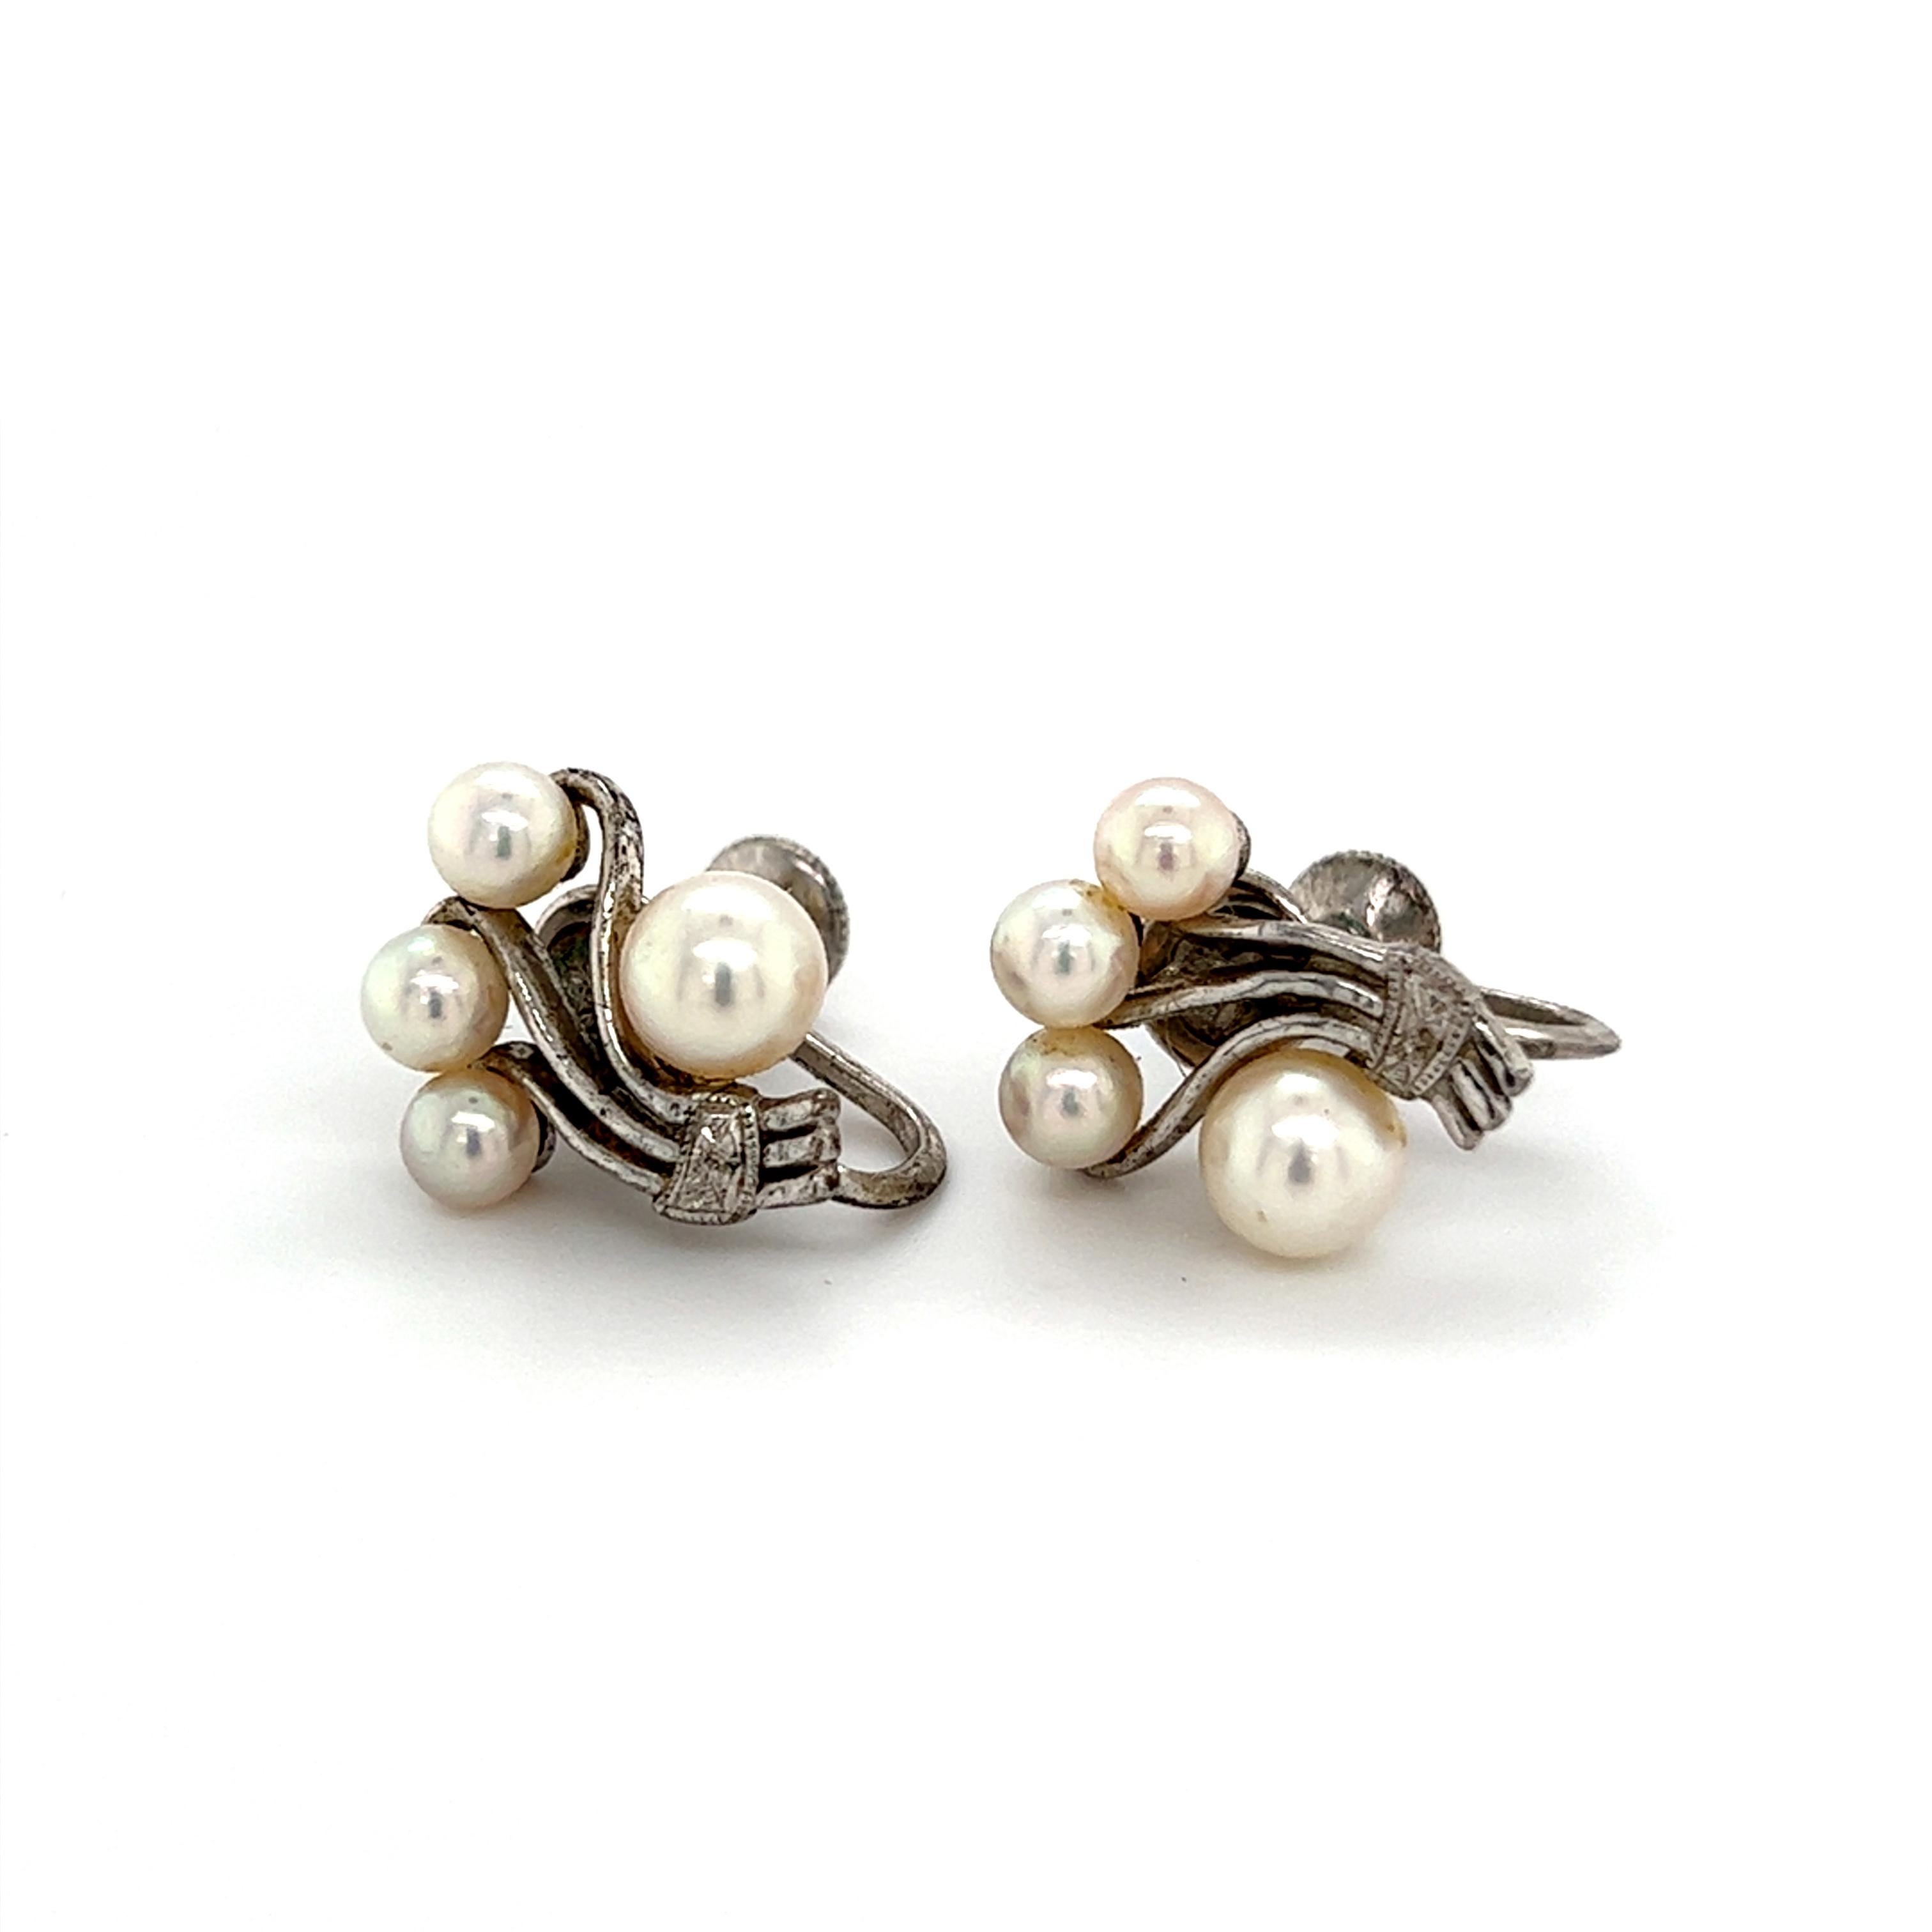 Mikimoto Estate Akoya Pearl Earrings Sterling Silver 5.75 mm 4.5 Grams In Good Condition For Sale In Brooklyn, NY